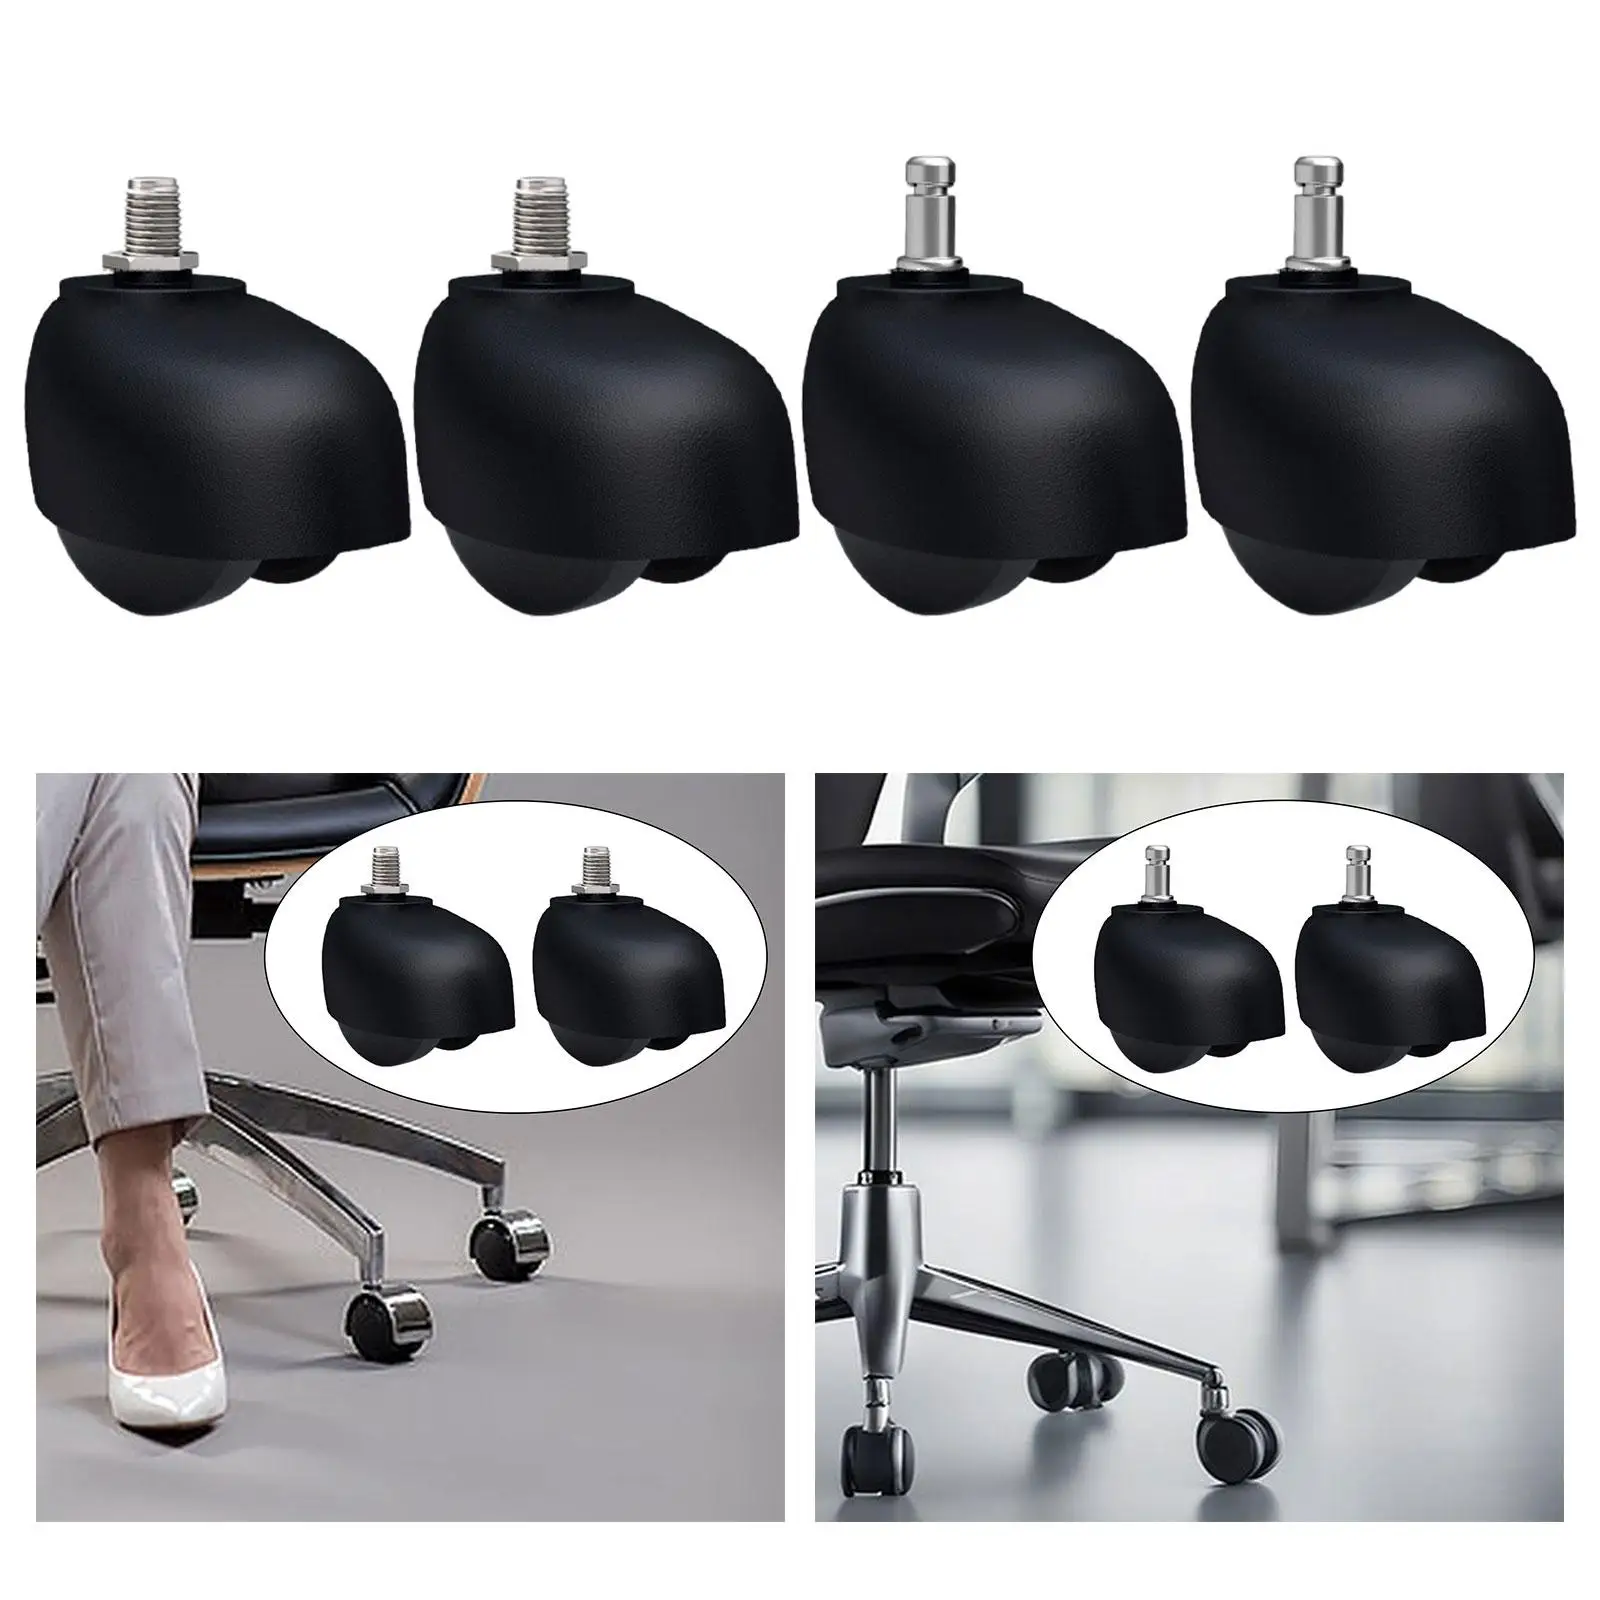 2x Replacement Office Chair Wheels Universal Computer Chair Wheels Chair Casters for Desk Chairs Computer Chairs Gaming Chairs